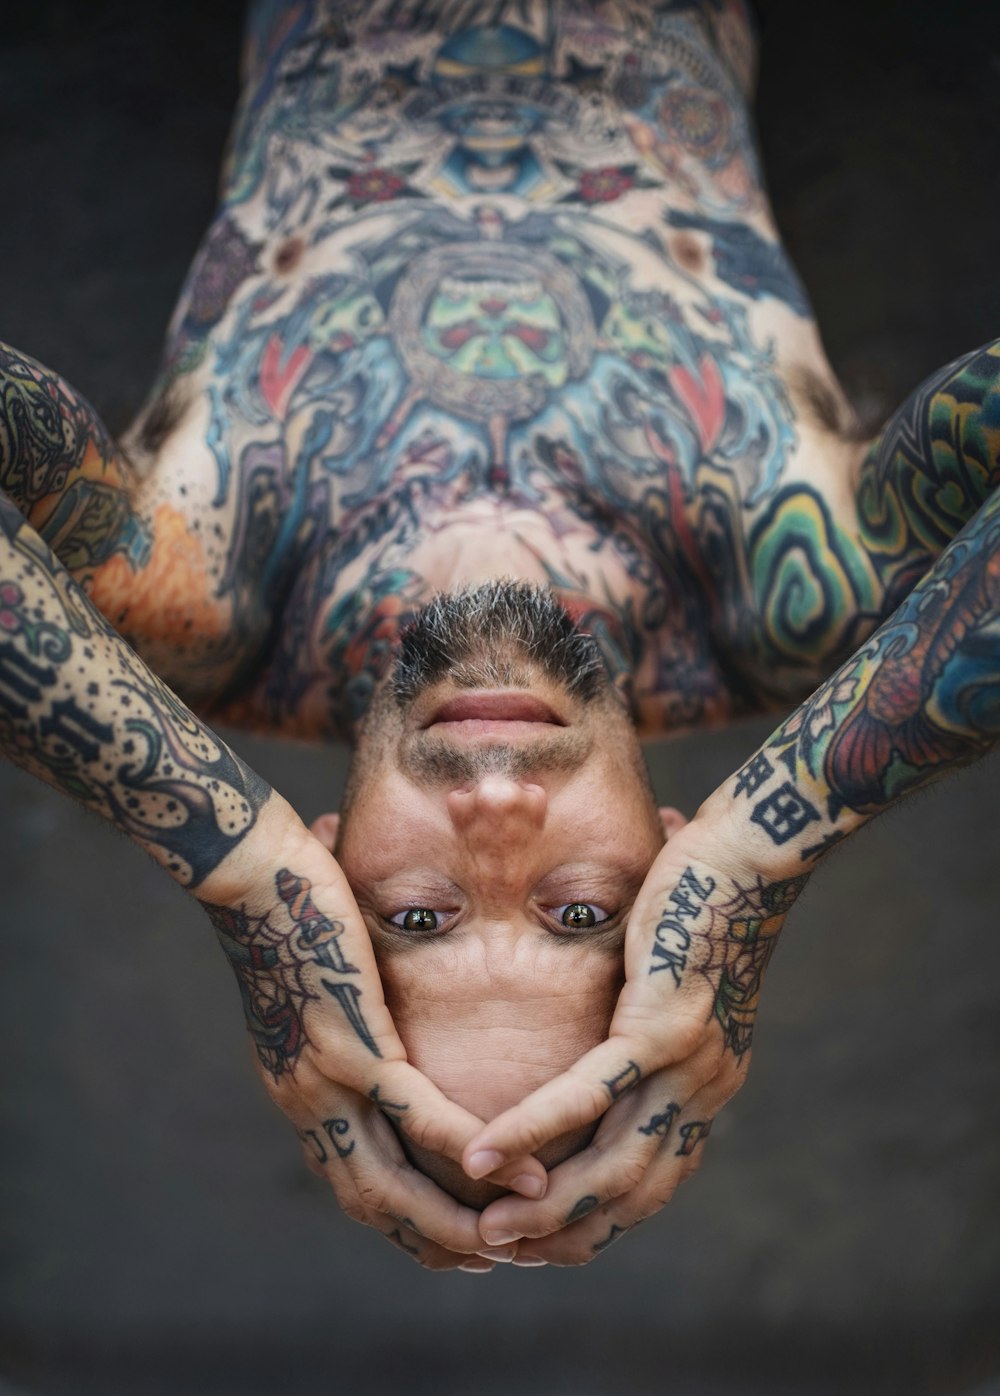 man with arms and body tattoos